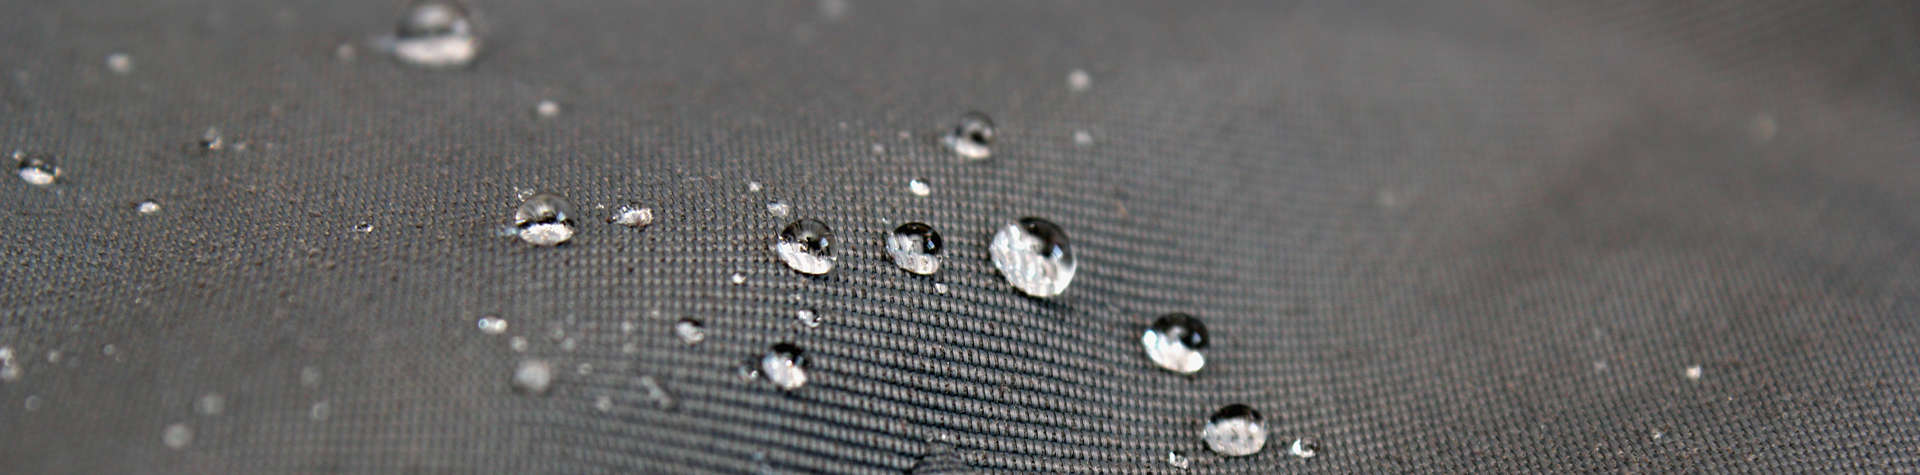 cut and water resistant fabric